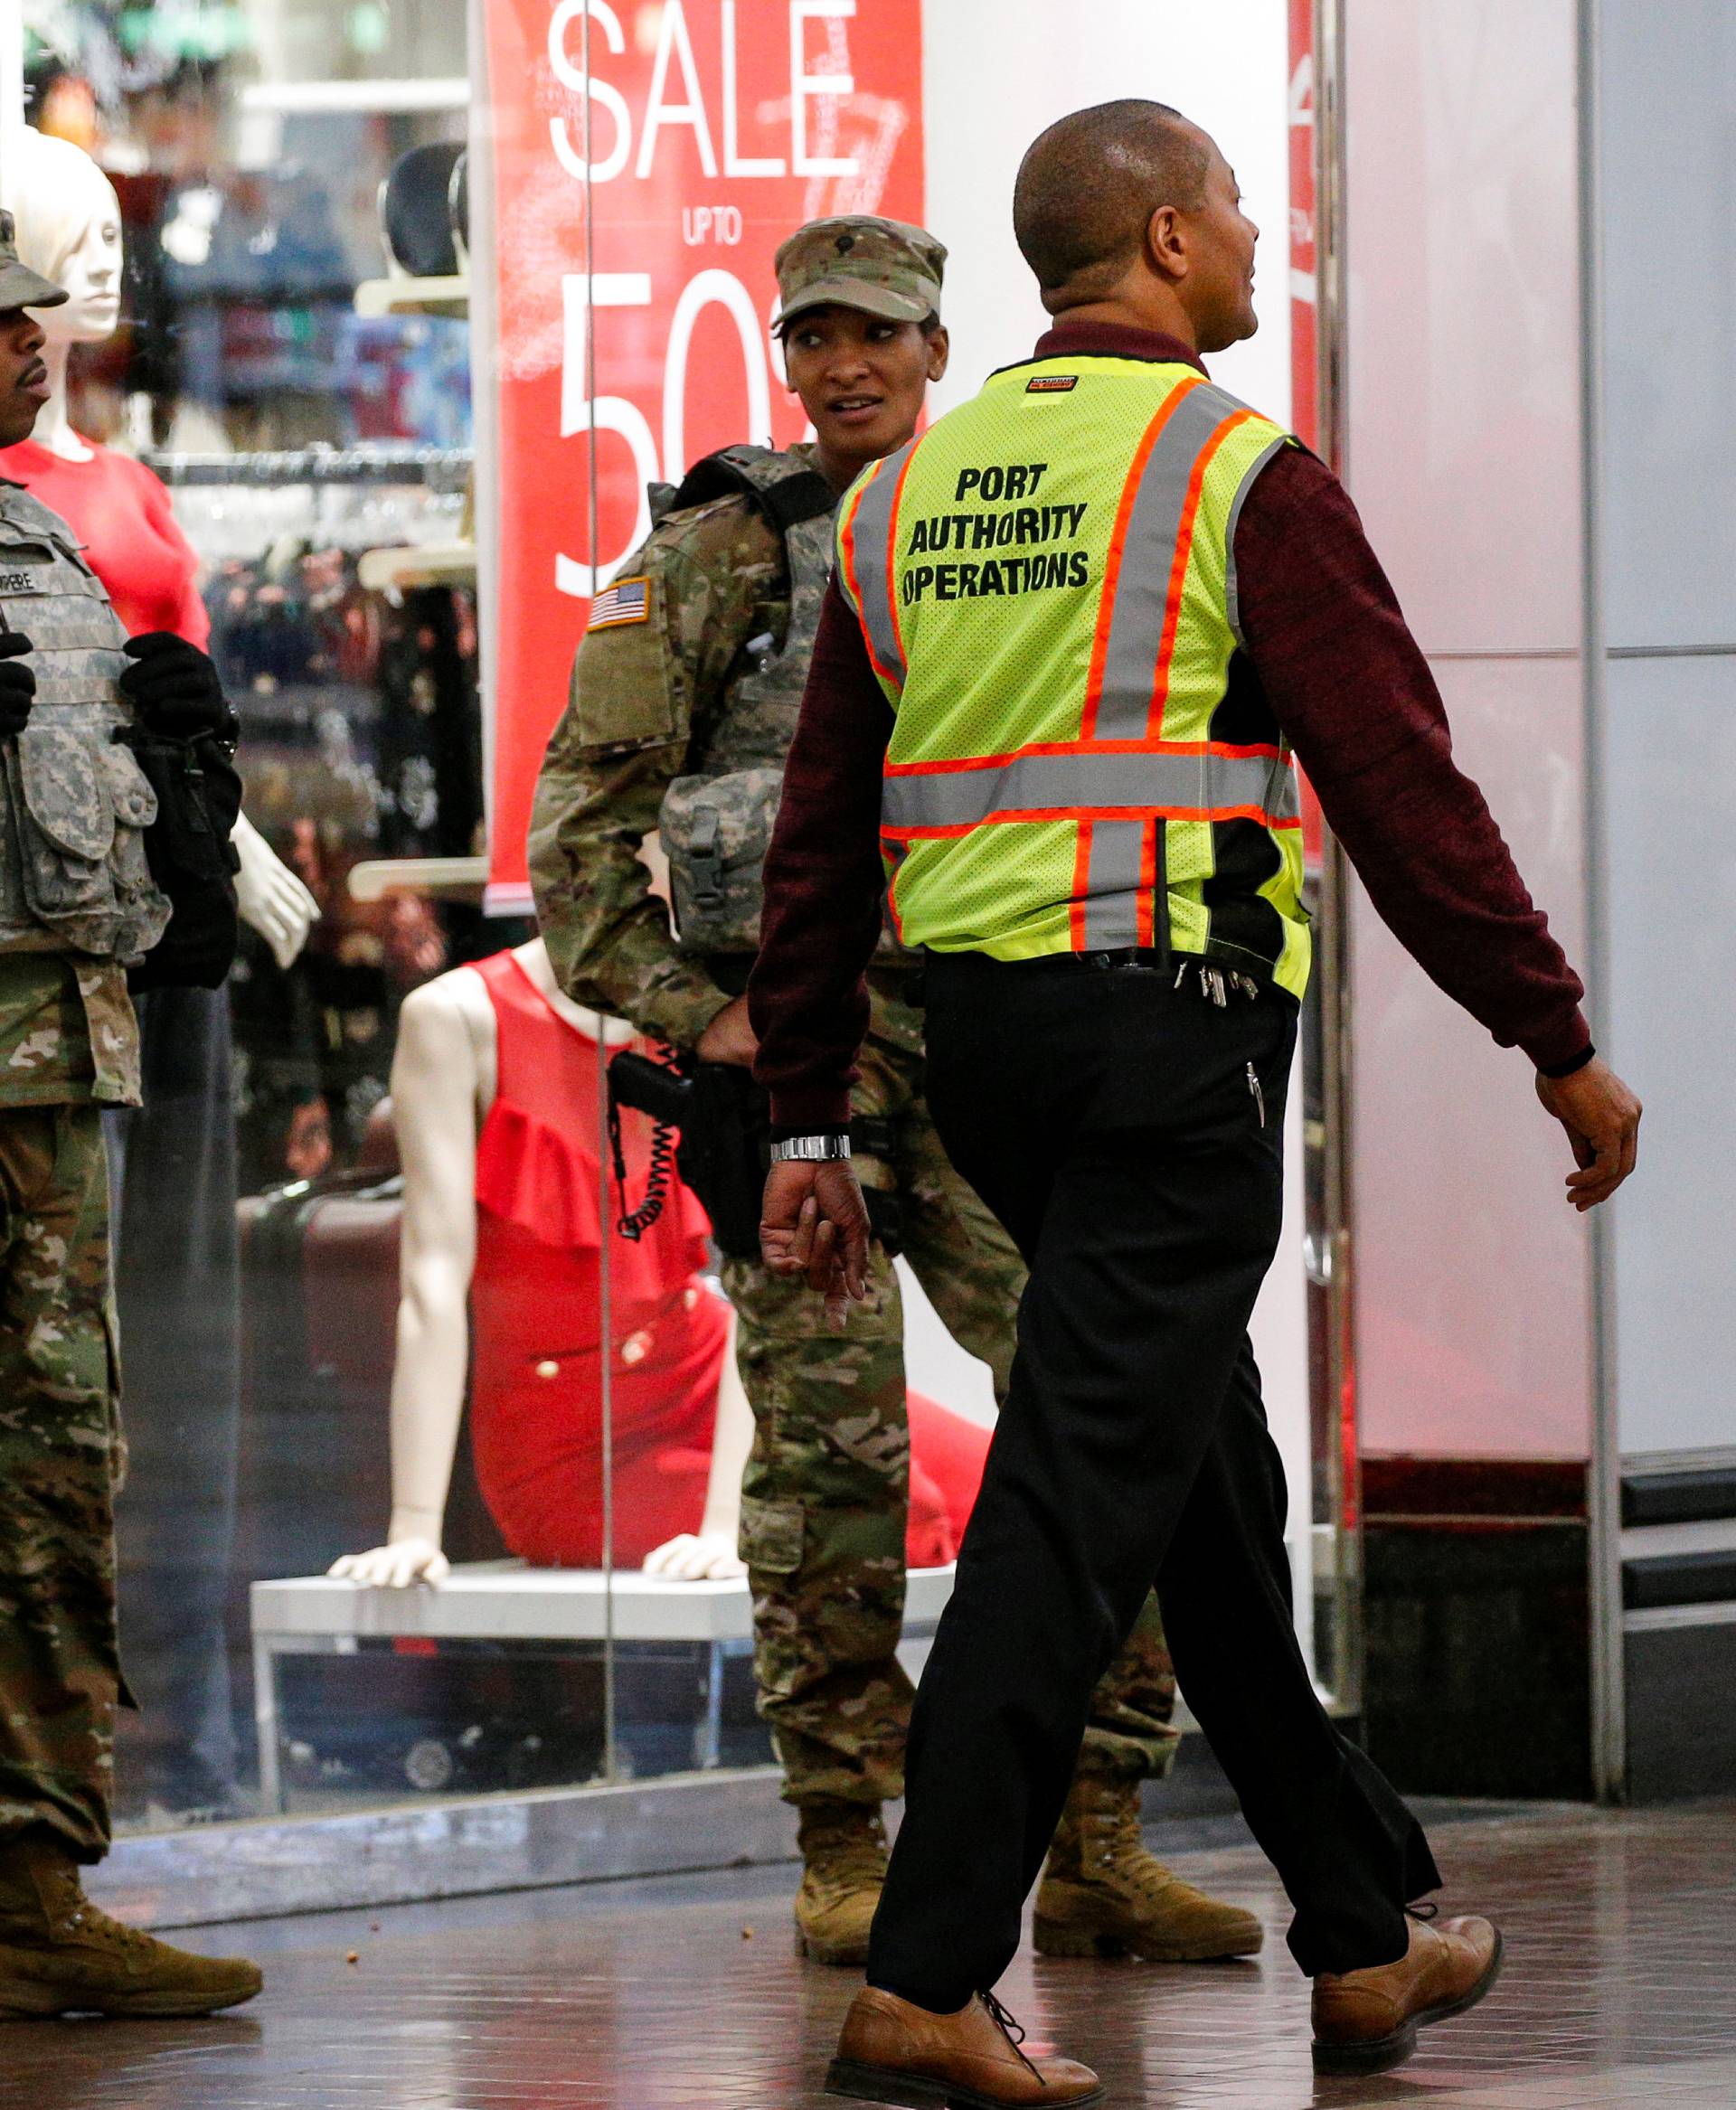 Security personnel patrol inside the New York Port Authority bus terminal following an attempted detonation during the morning rush hour in New York